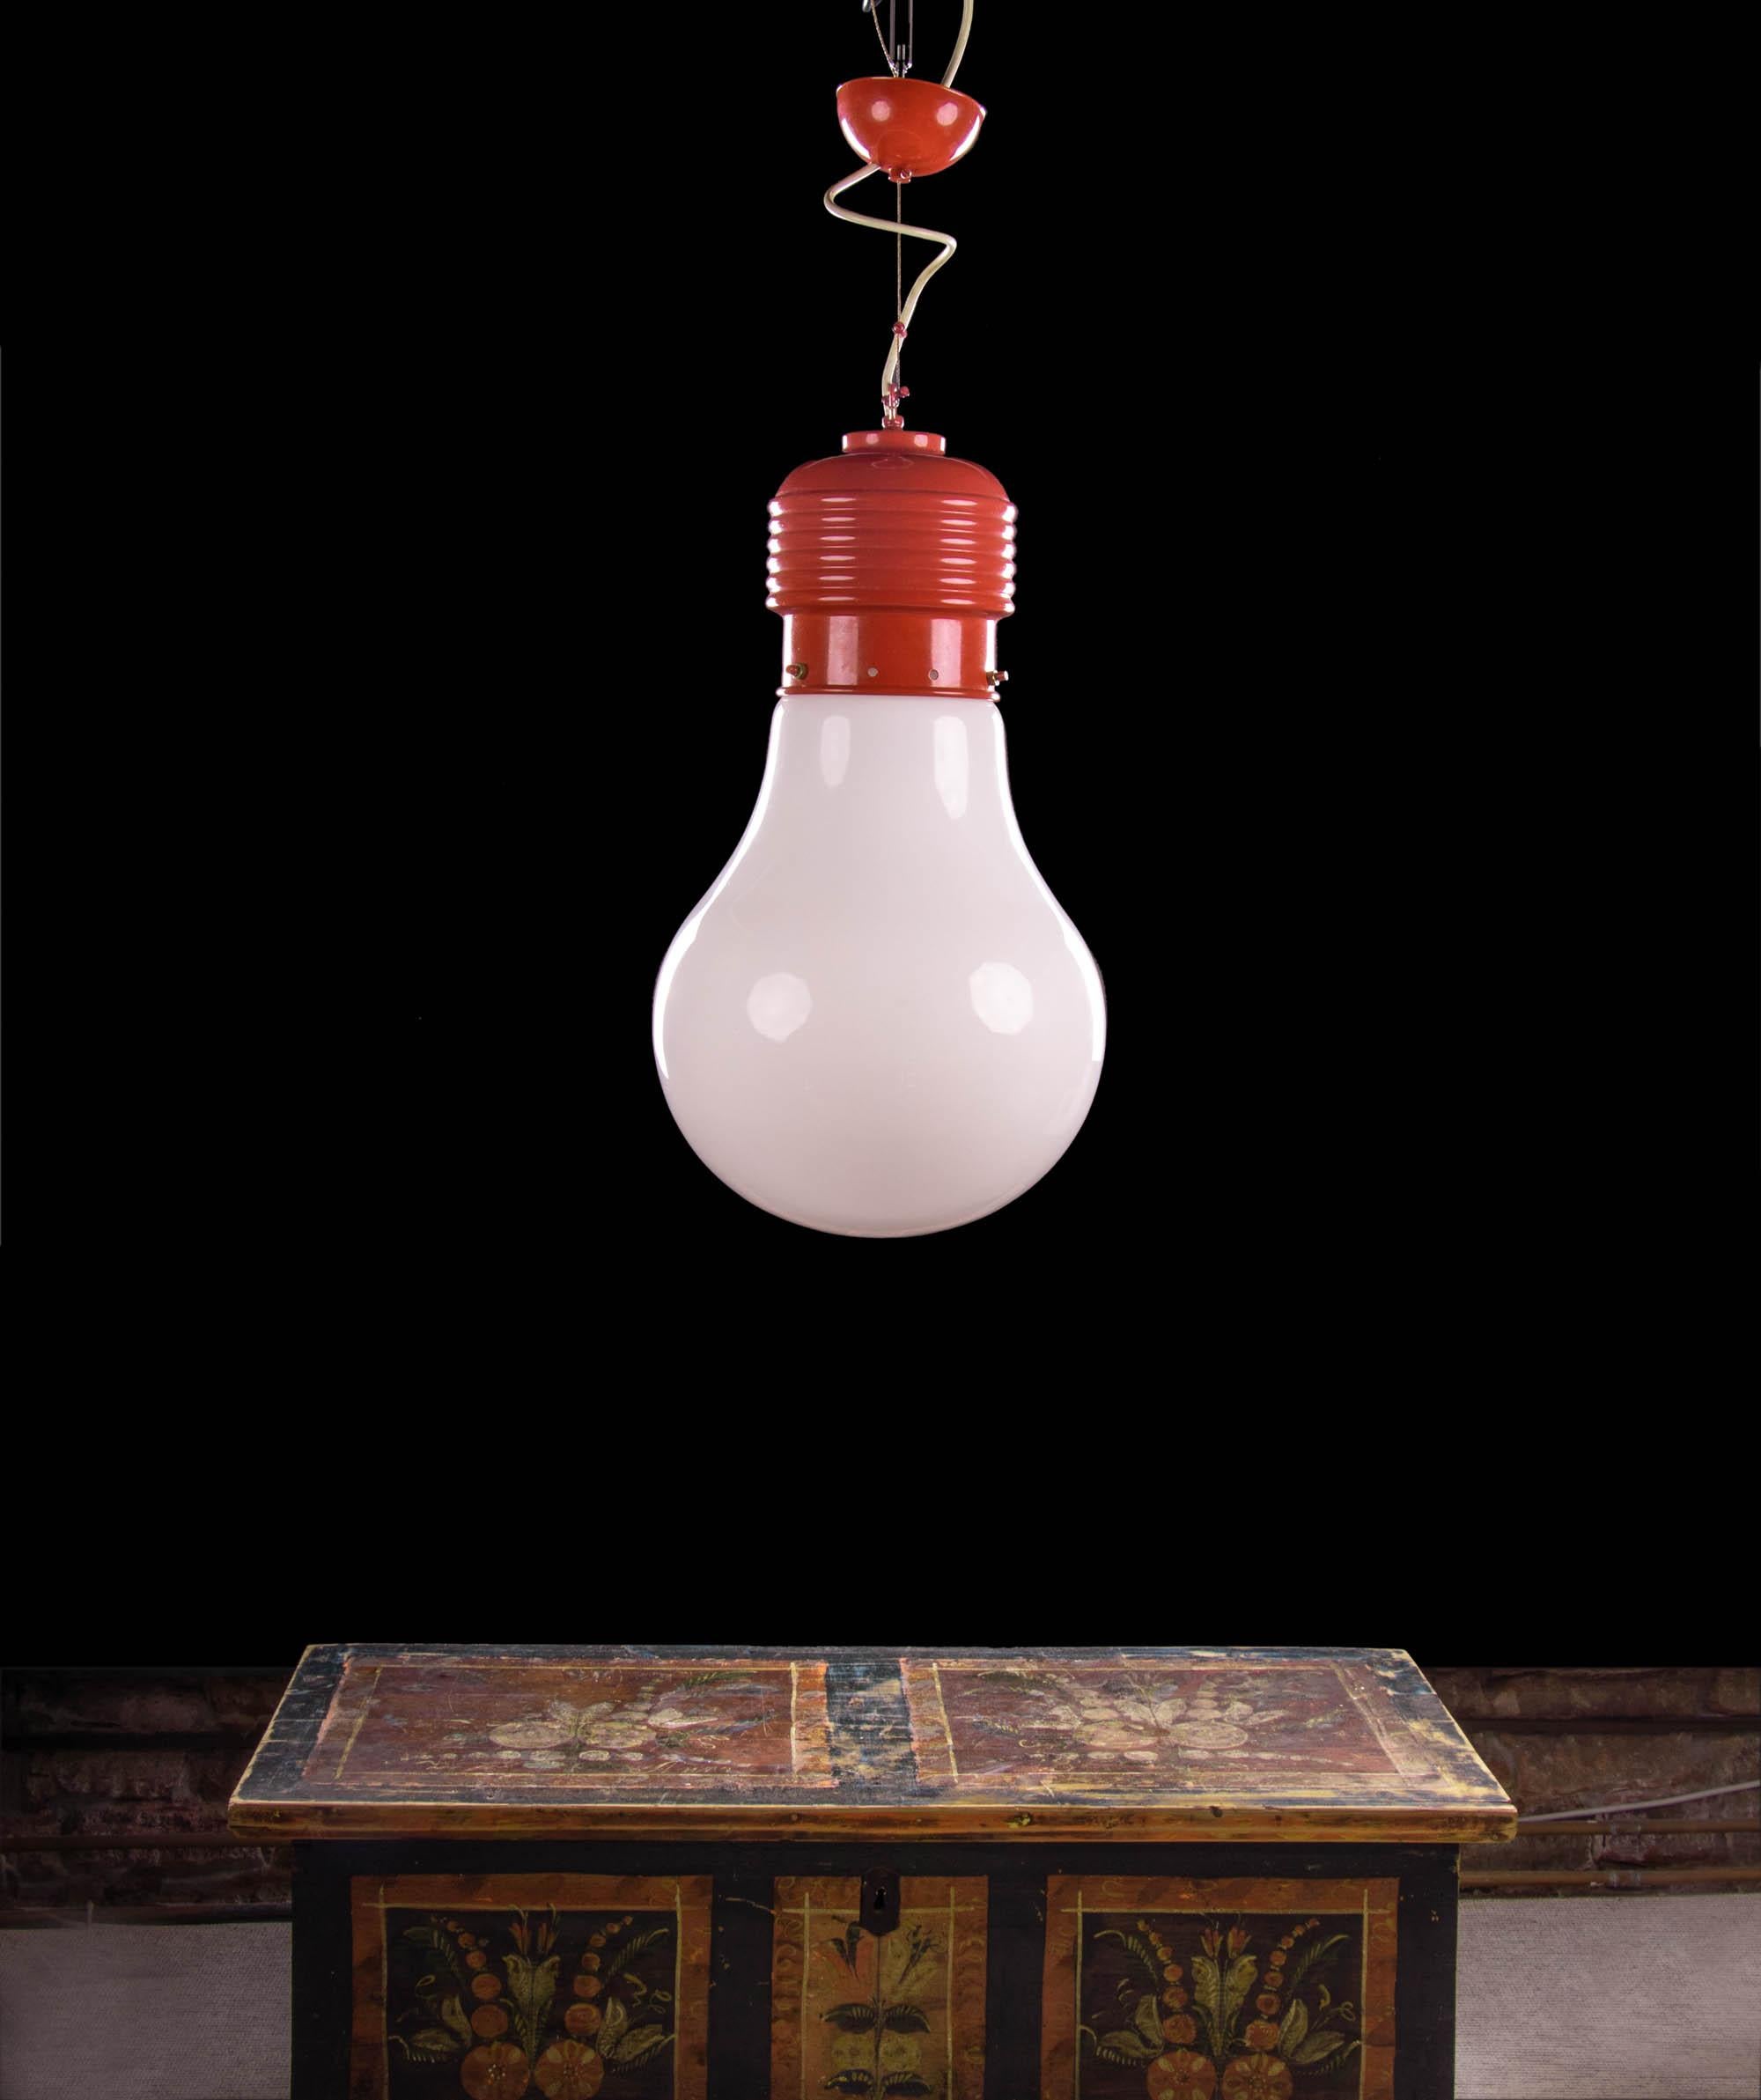 Vintage oversized lightbulb ceiling light designed in the manner of Ingo Maurer. Manufactured in Germany, 1960s-1970s. 

Materials: glass and brass. 
Colors: red and white. 
Measures: diameter 11.8